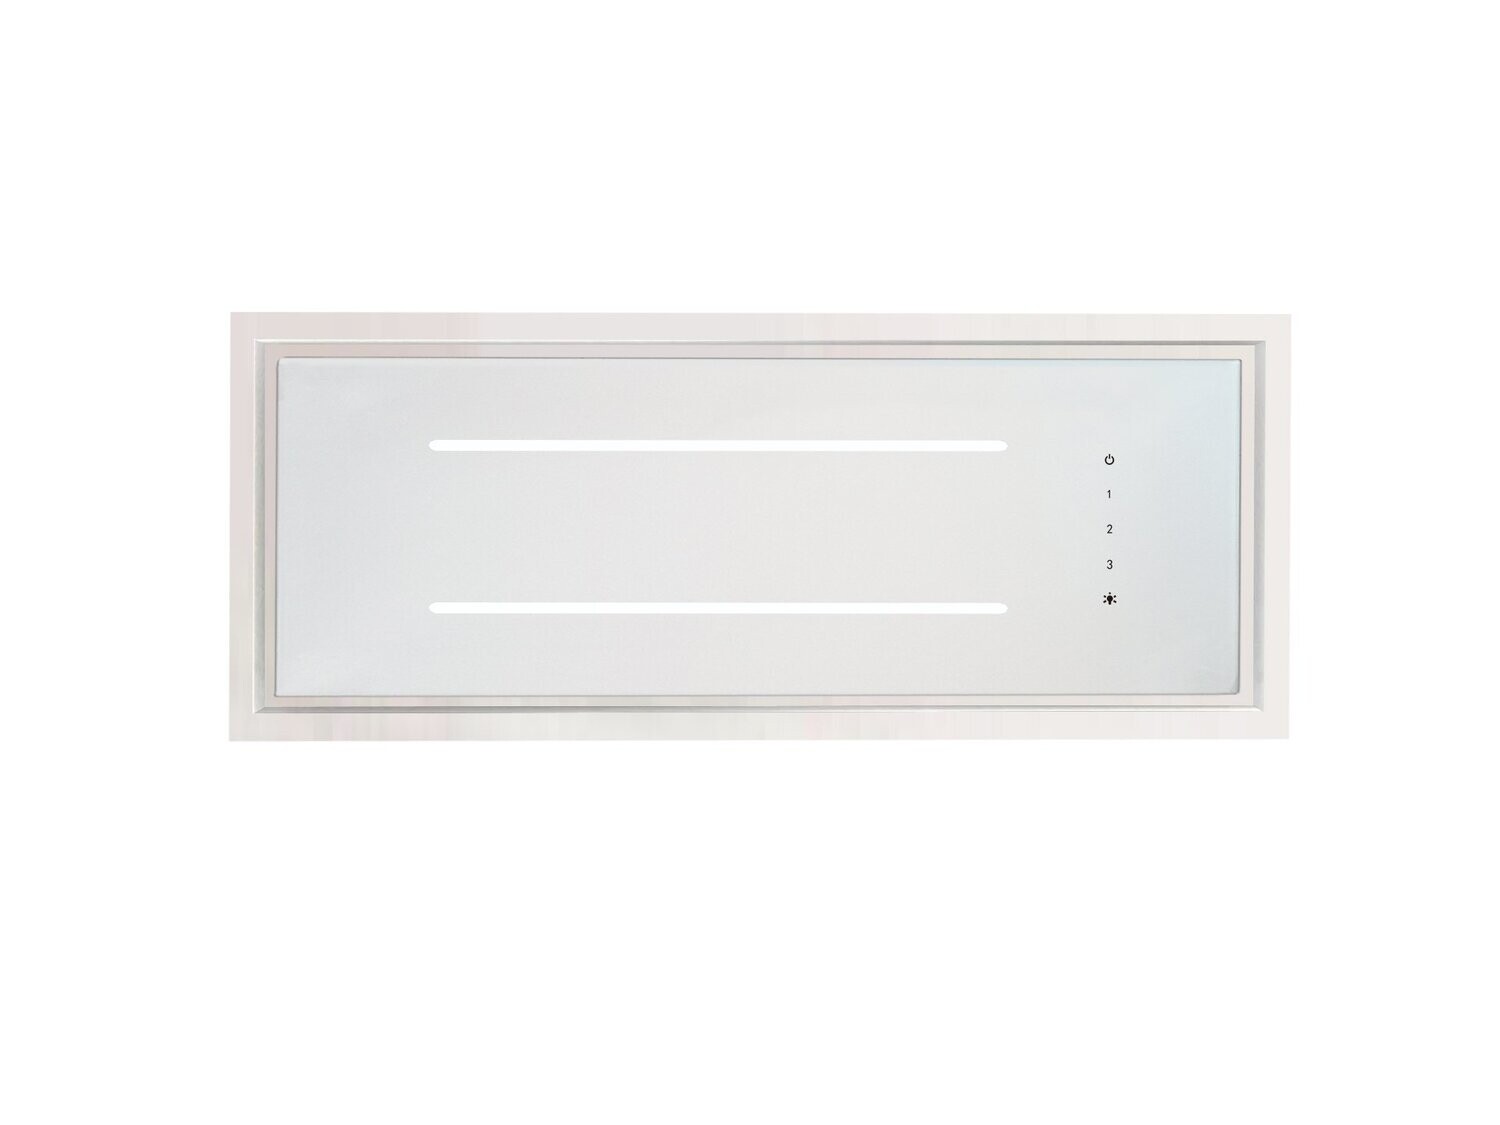 Aria Flush Fit Ceiling Hood 90 x 30 White Glass / White Frame Fits Between Joists